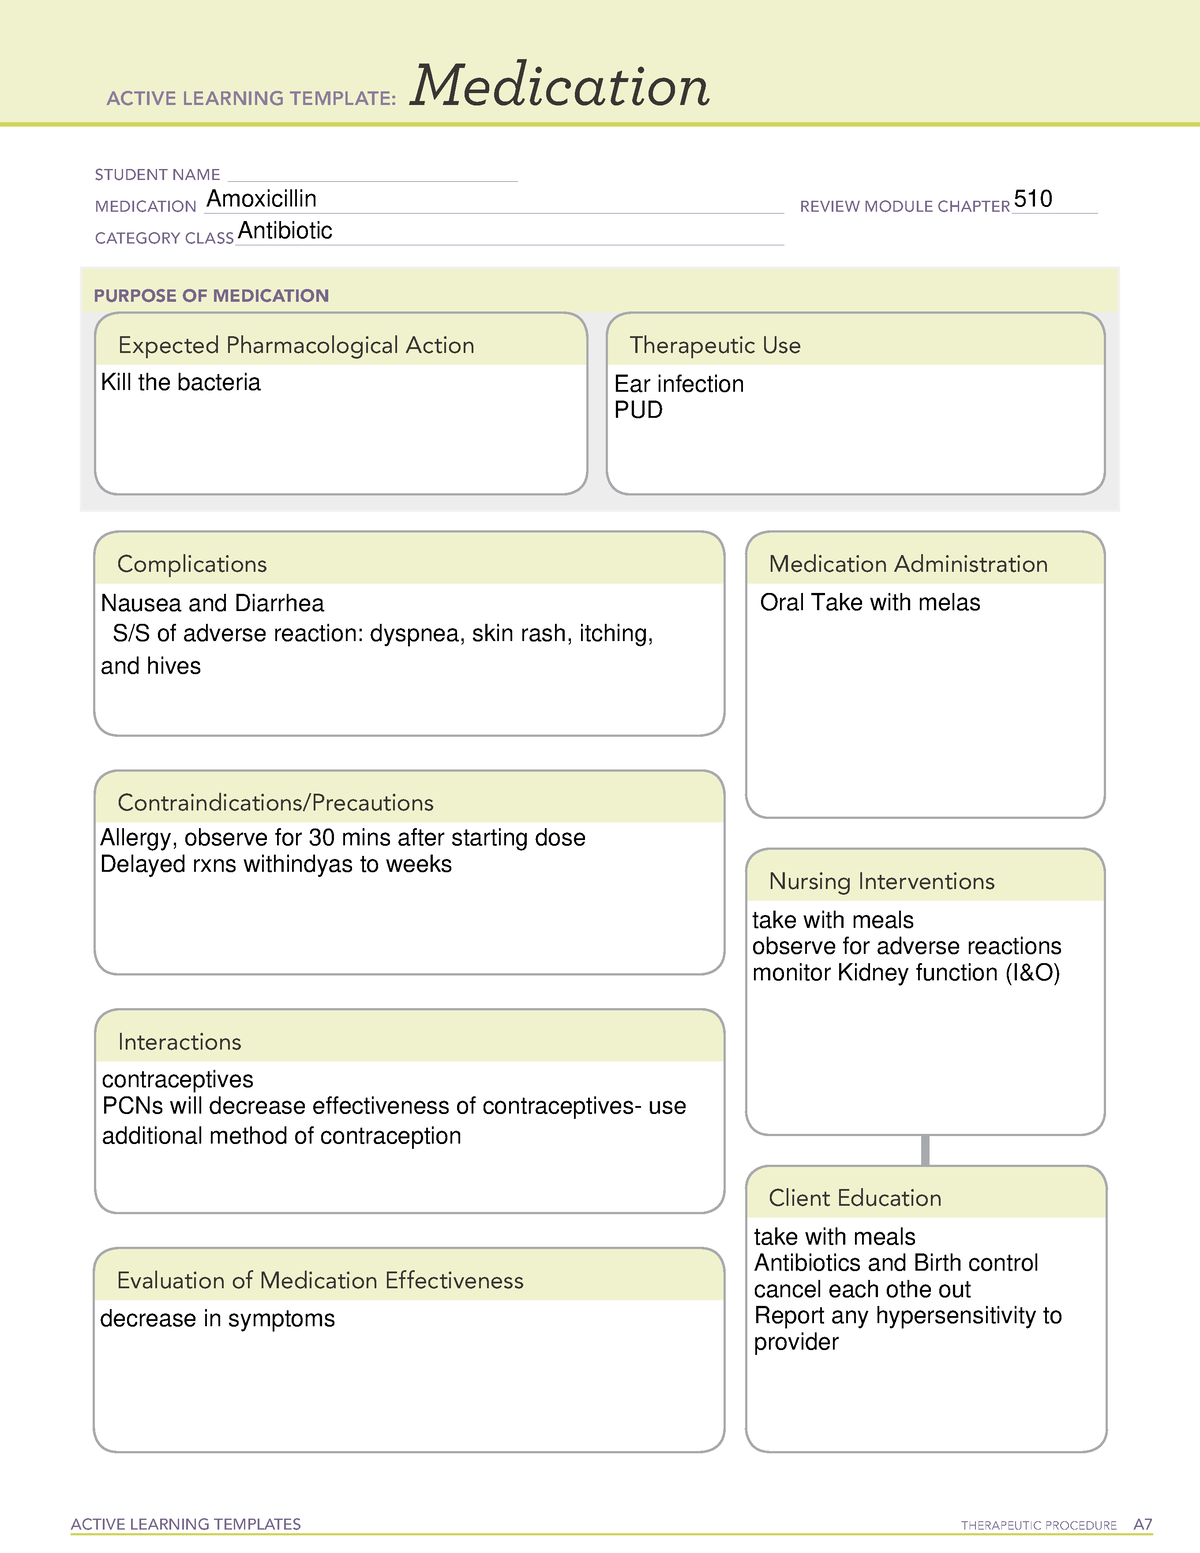 Amoxicillin Medication template for exam ACTIVE LEARNING TEMPLATES